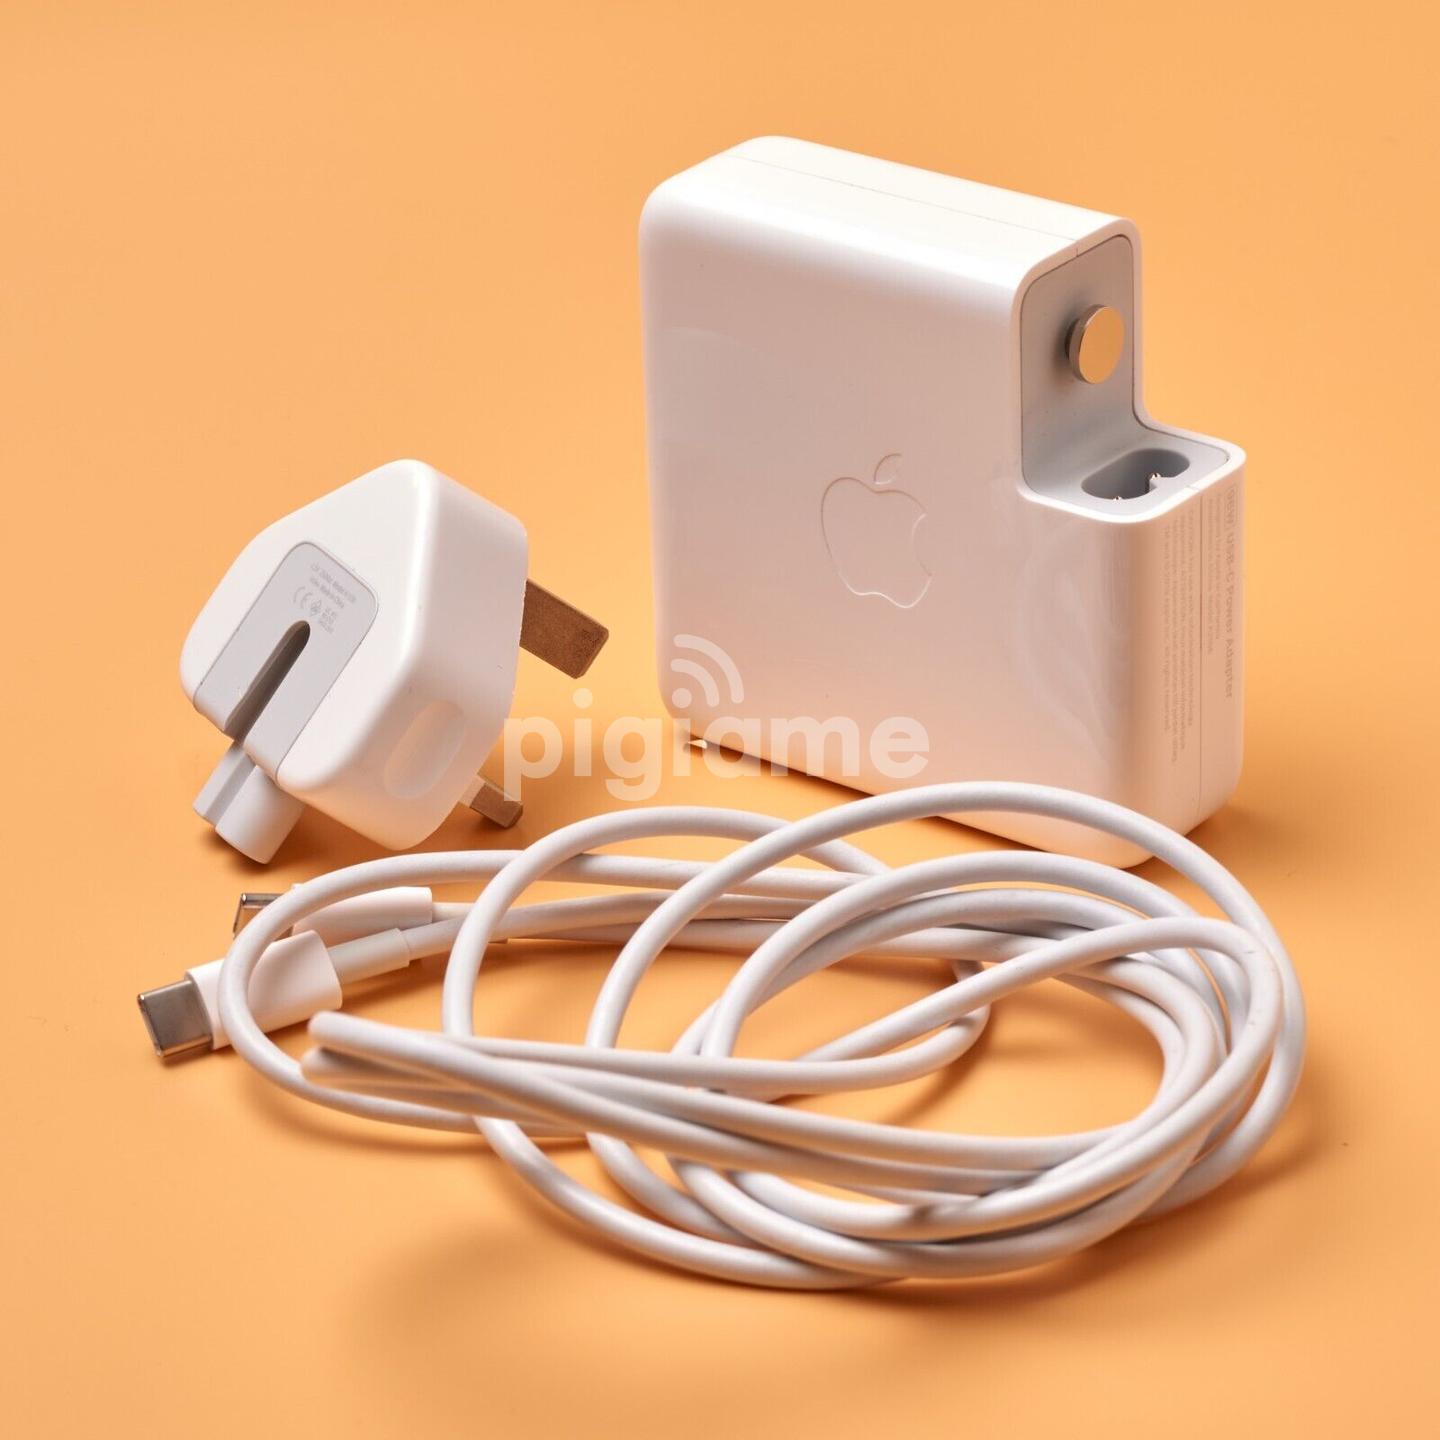 MacBook Pro Charger - 96W USB-C Fast Charger Power Adapter